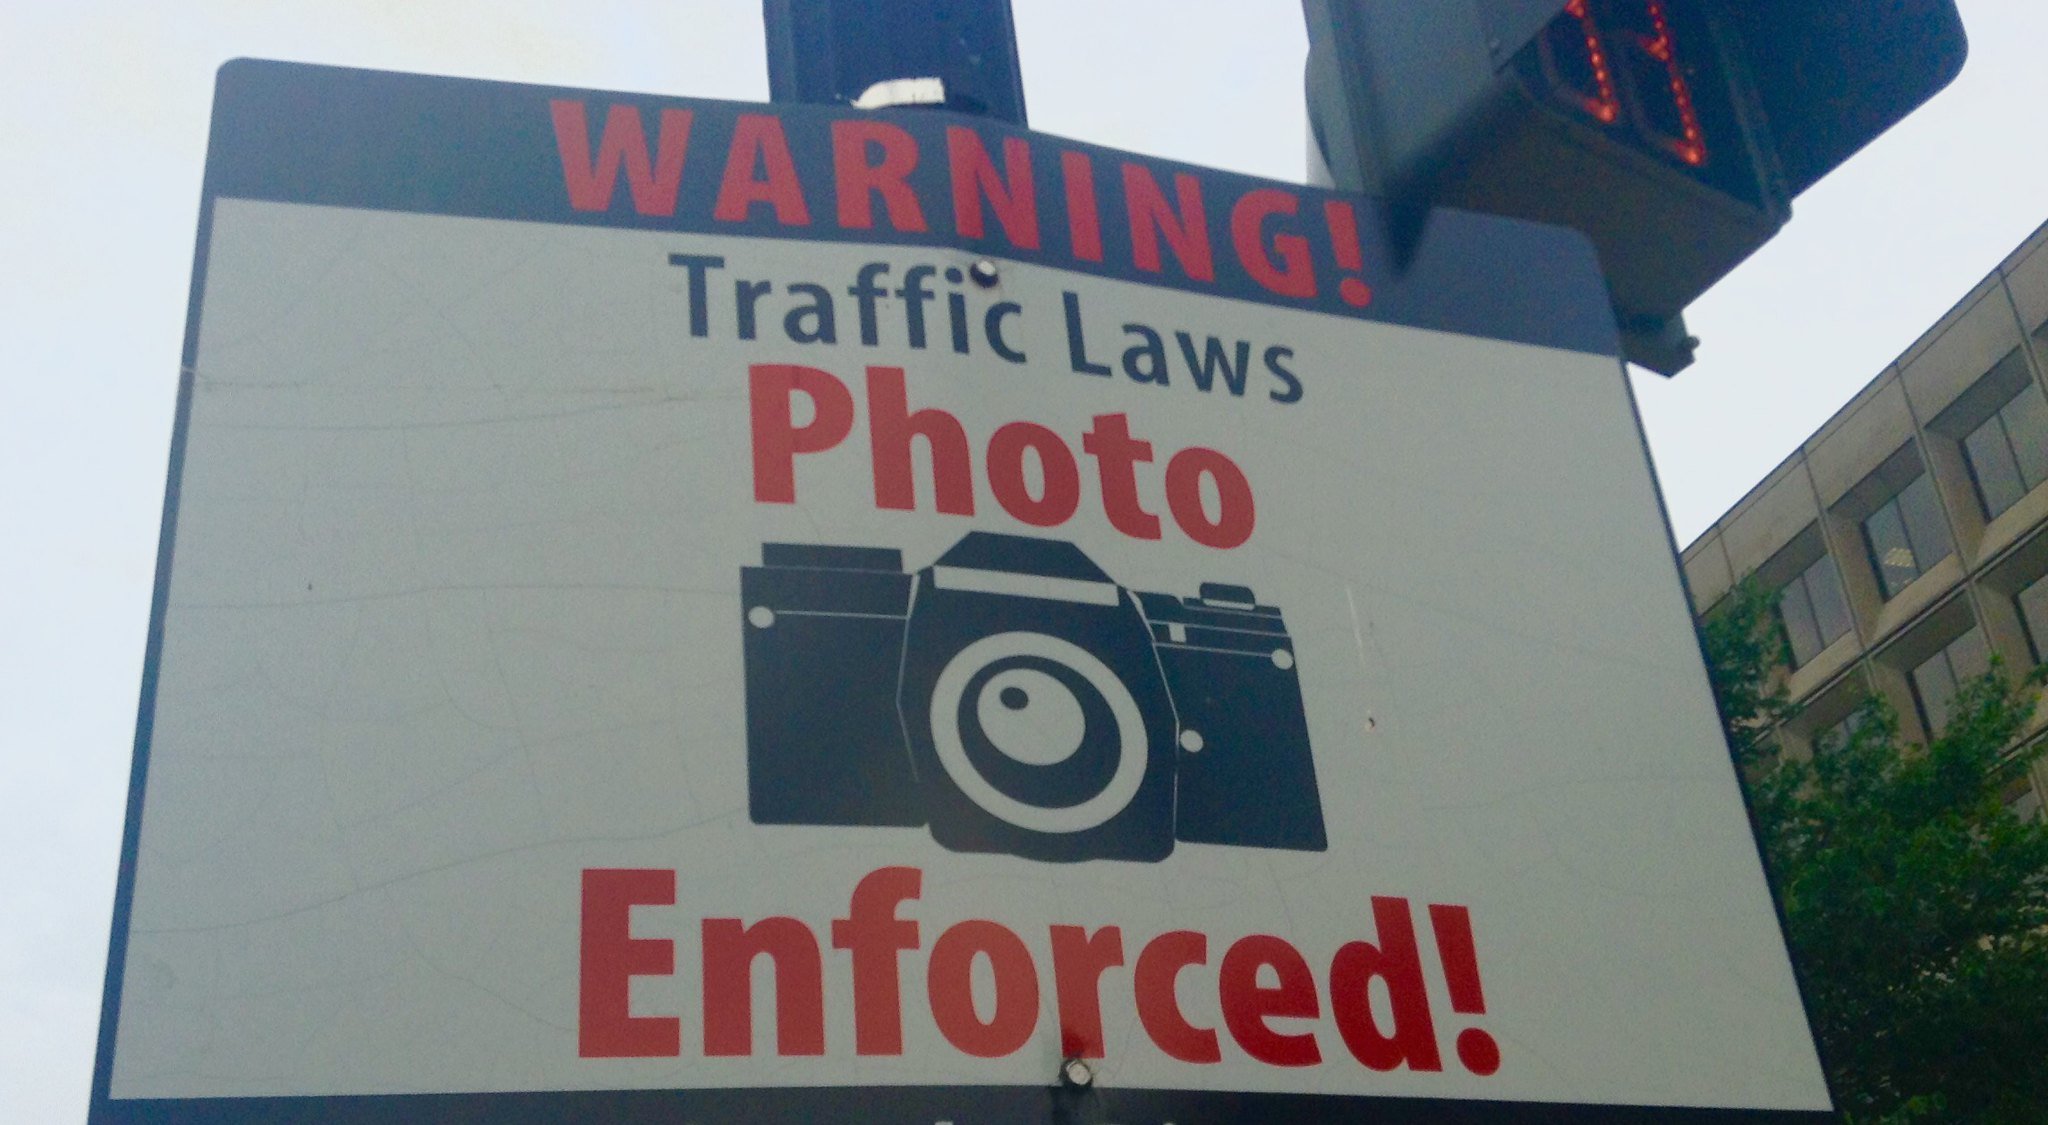 A speed camera sign in DC.